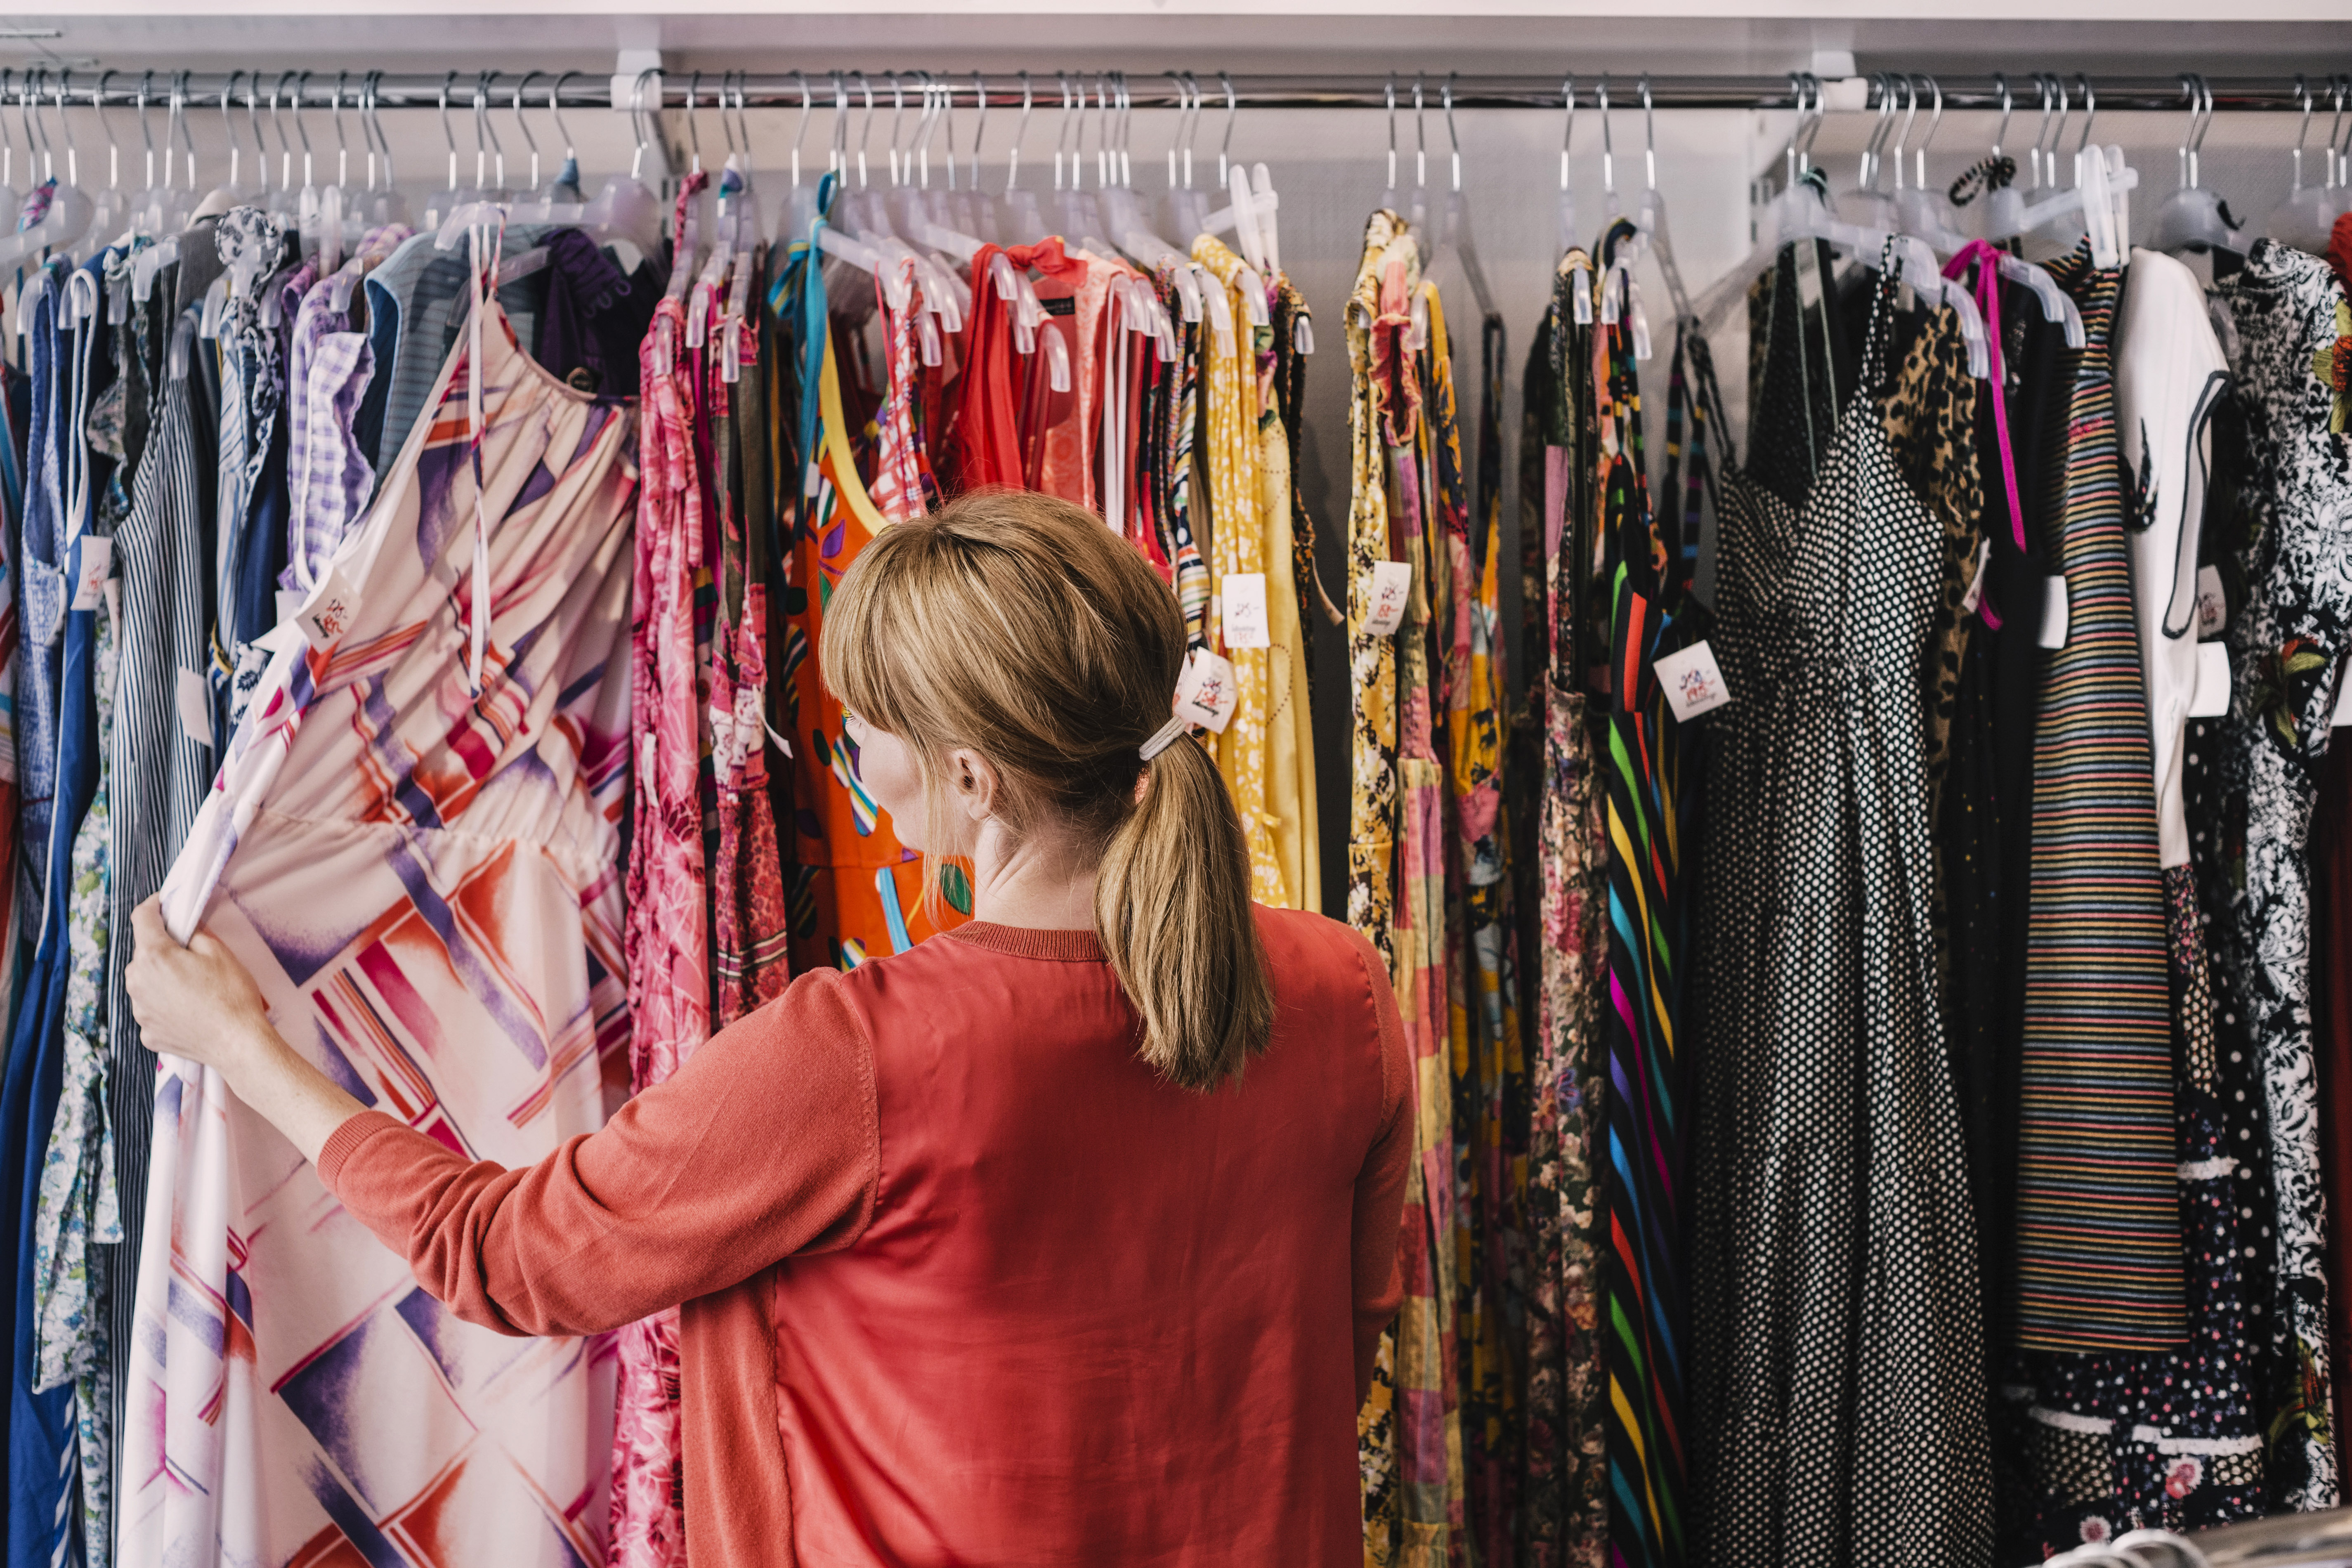 A woman looking at dresses in a store | Source: Getty Images